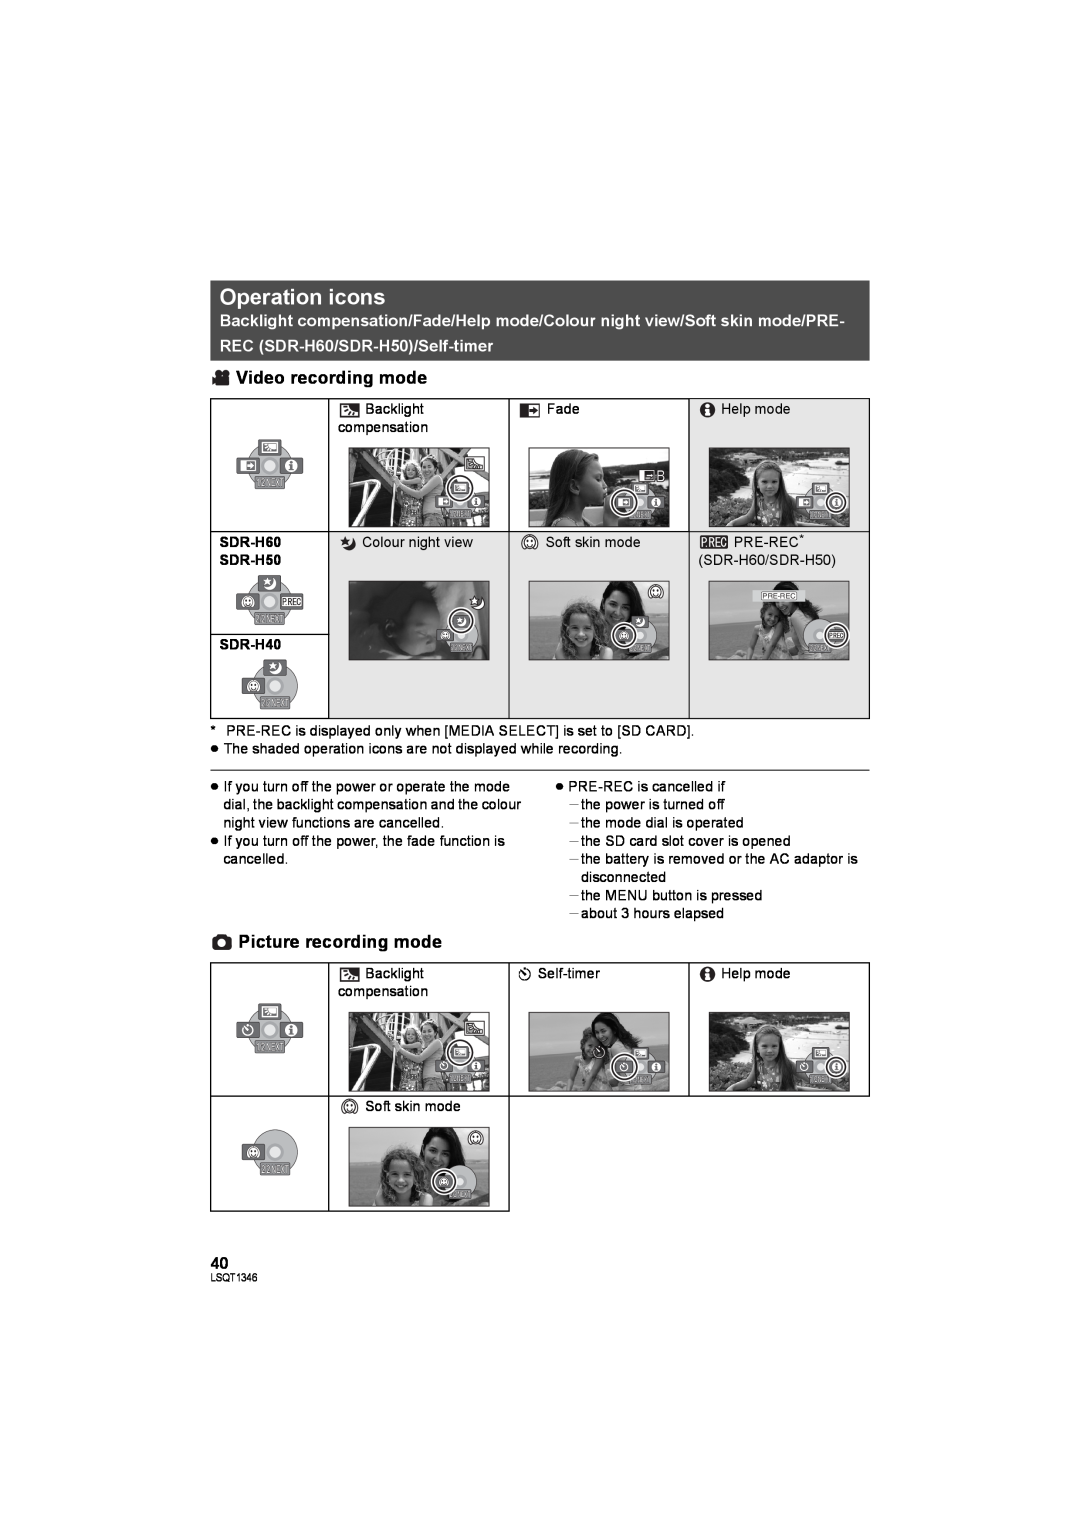 Panasonic SDR-H50 operating instructions Operation icons, Video recording mode, Picture recording mode, SDR-H60, SDR-H40 